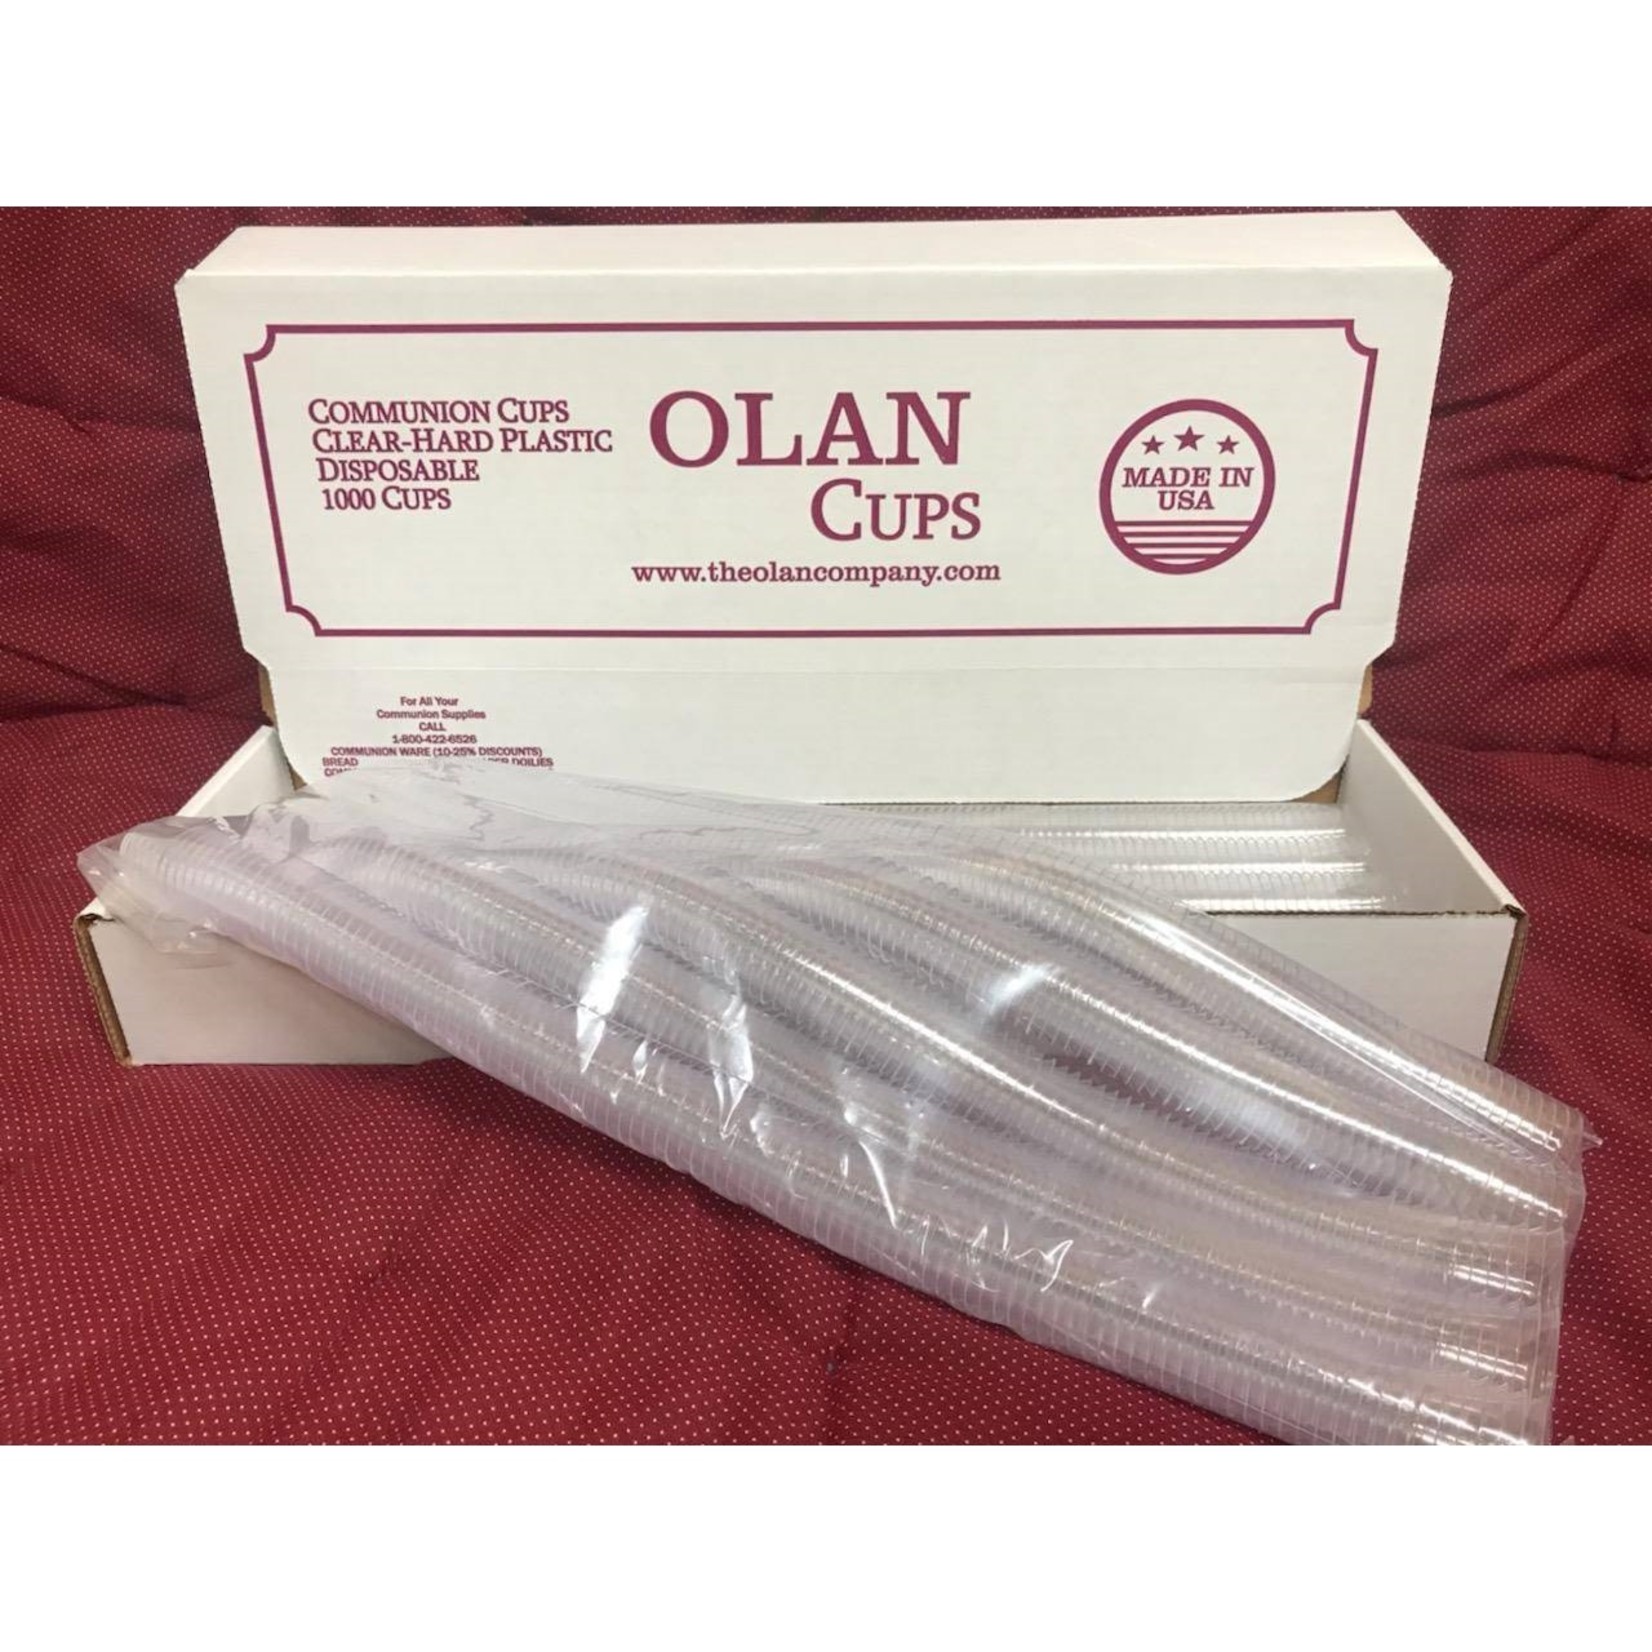 Olan Disposable Communion Cups - 1000 Pack